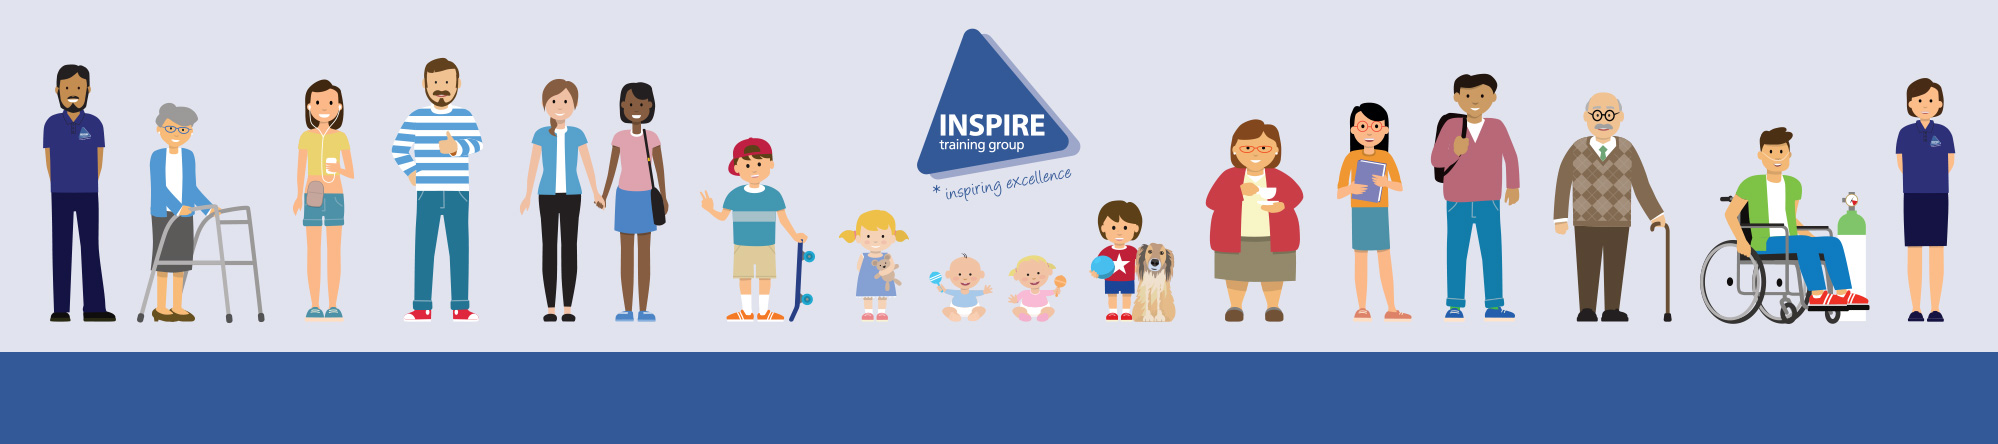 Welcome to Inspire Training Group